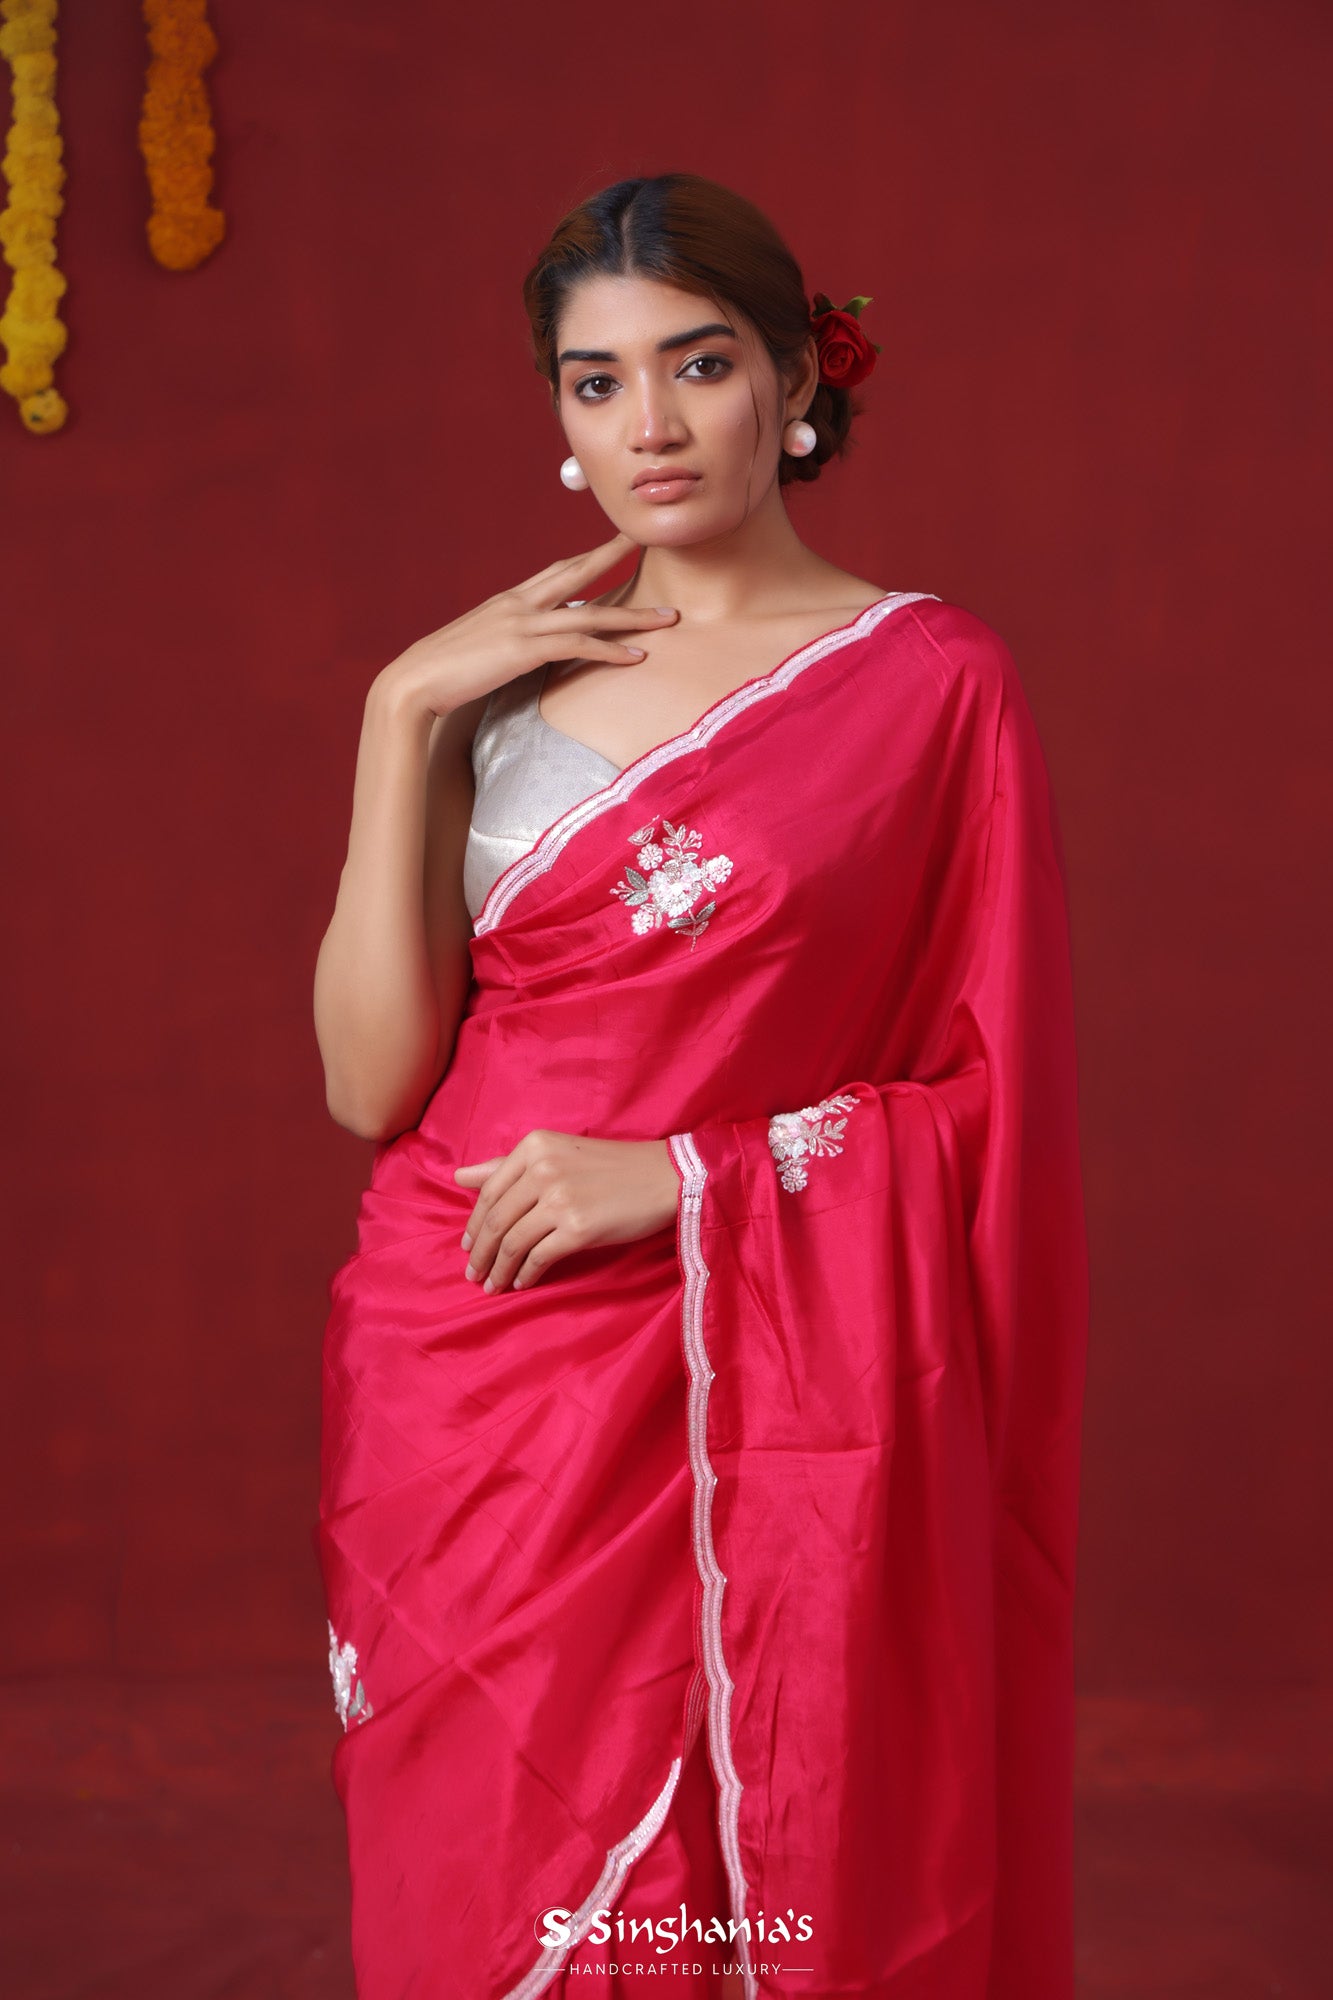 Imperial Red Modal Satin Saree With Hand Embroidery